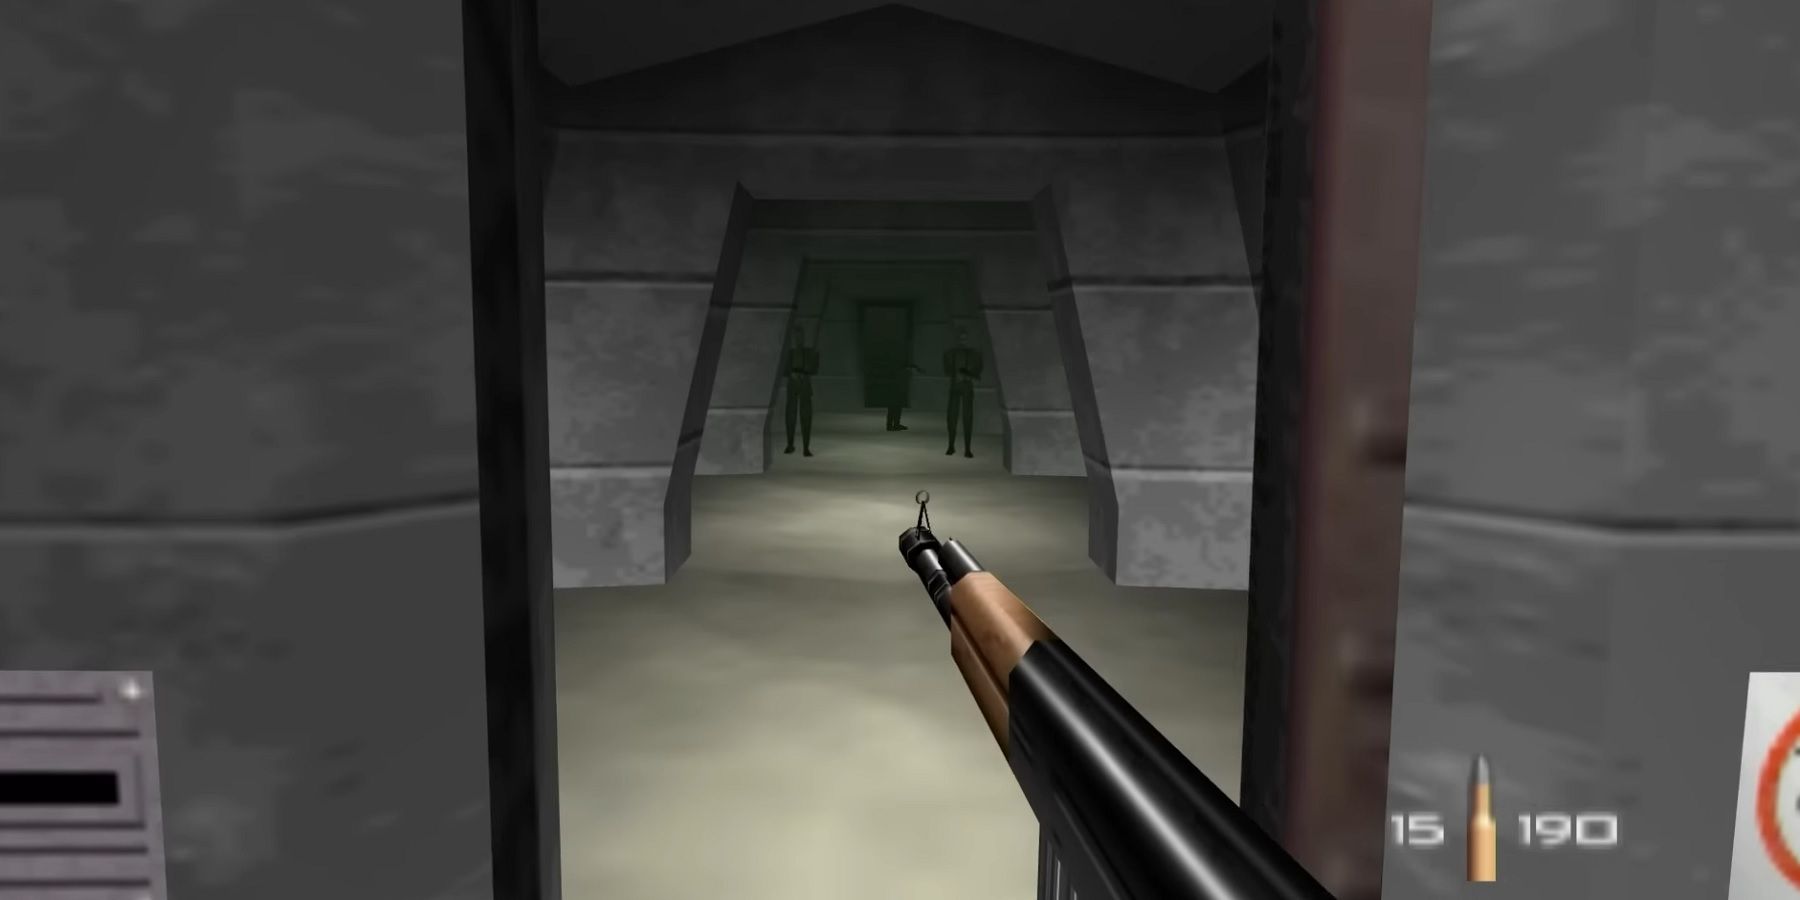 Image from Goldeneye 007 showing James Bond about to fire down a corridor filled with enemies.